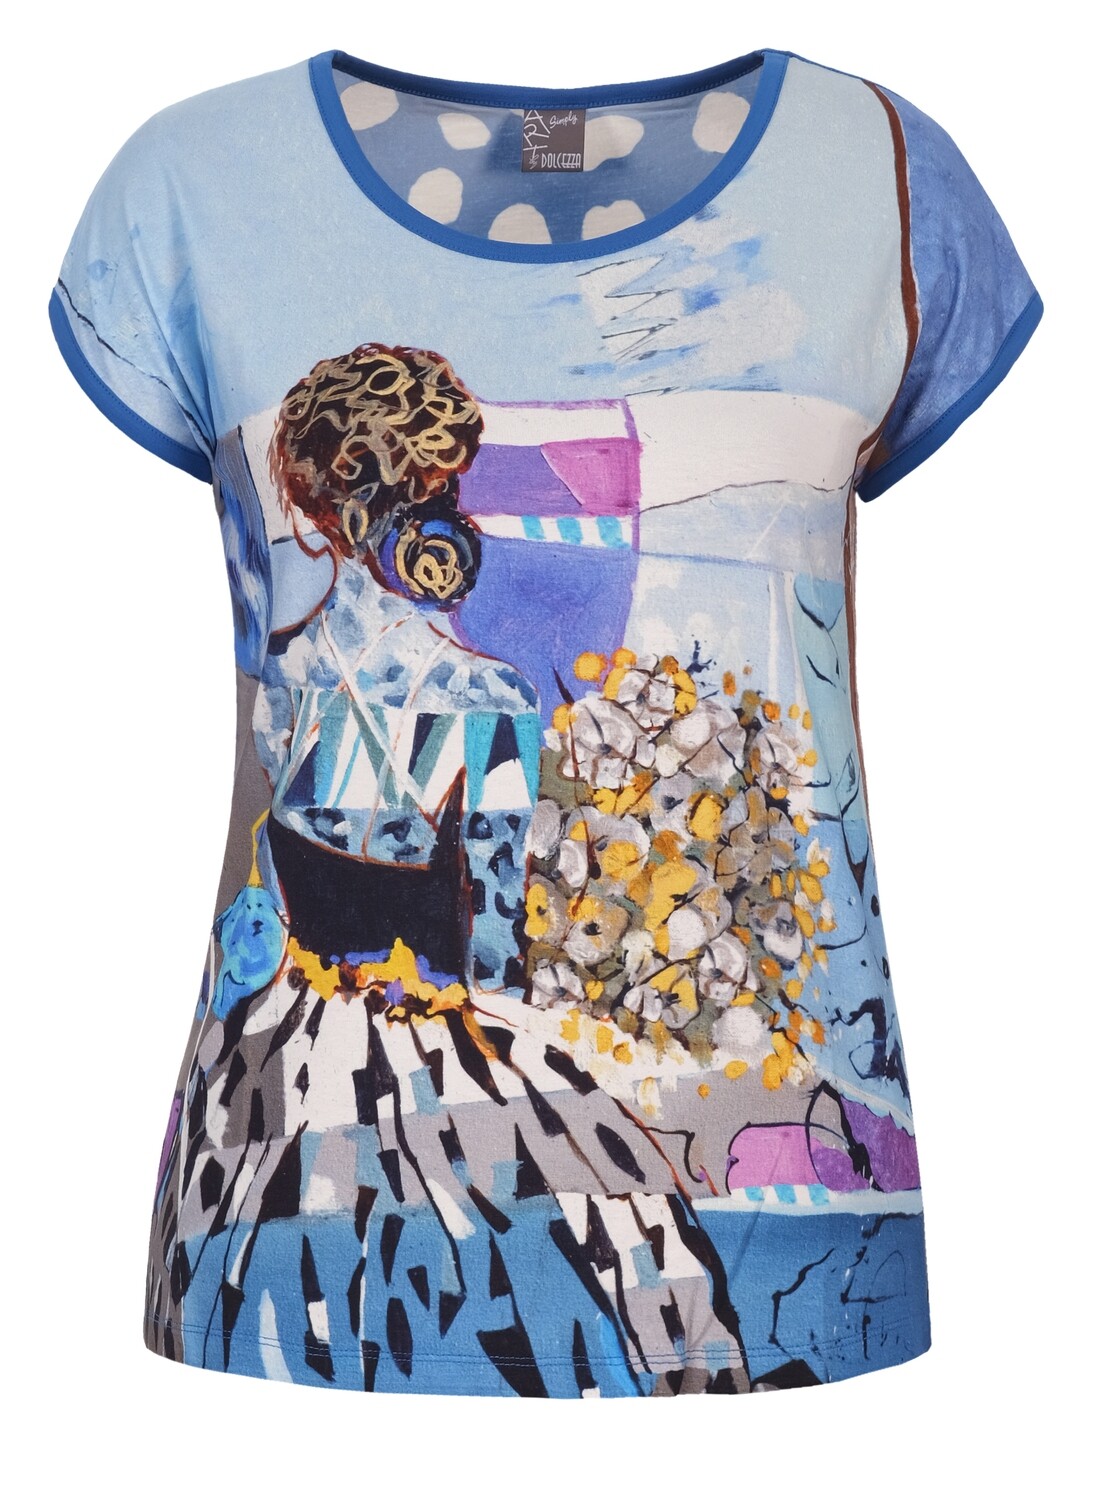 Simply Art Dolcezza: Princess Danae Capped Sleeve Abstract Art T-Shirt